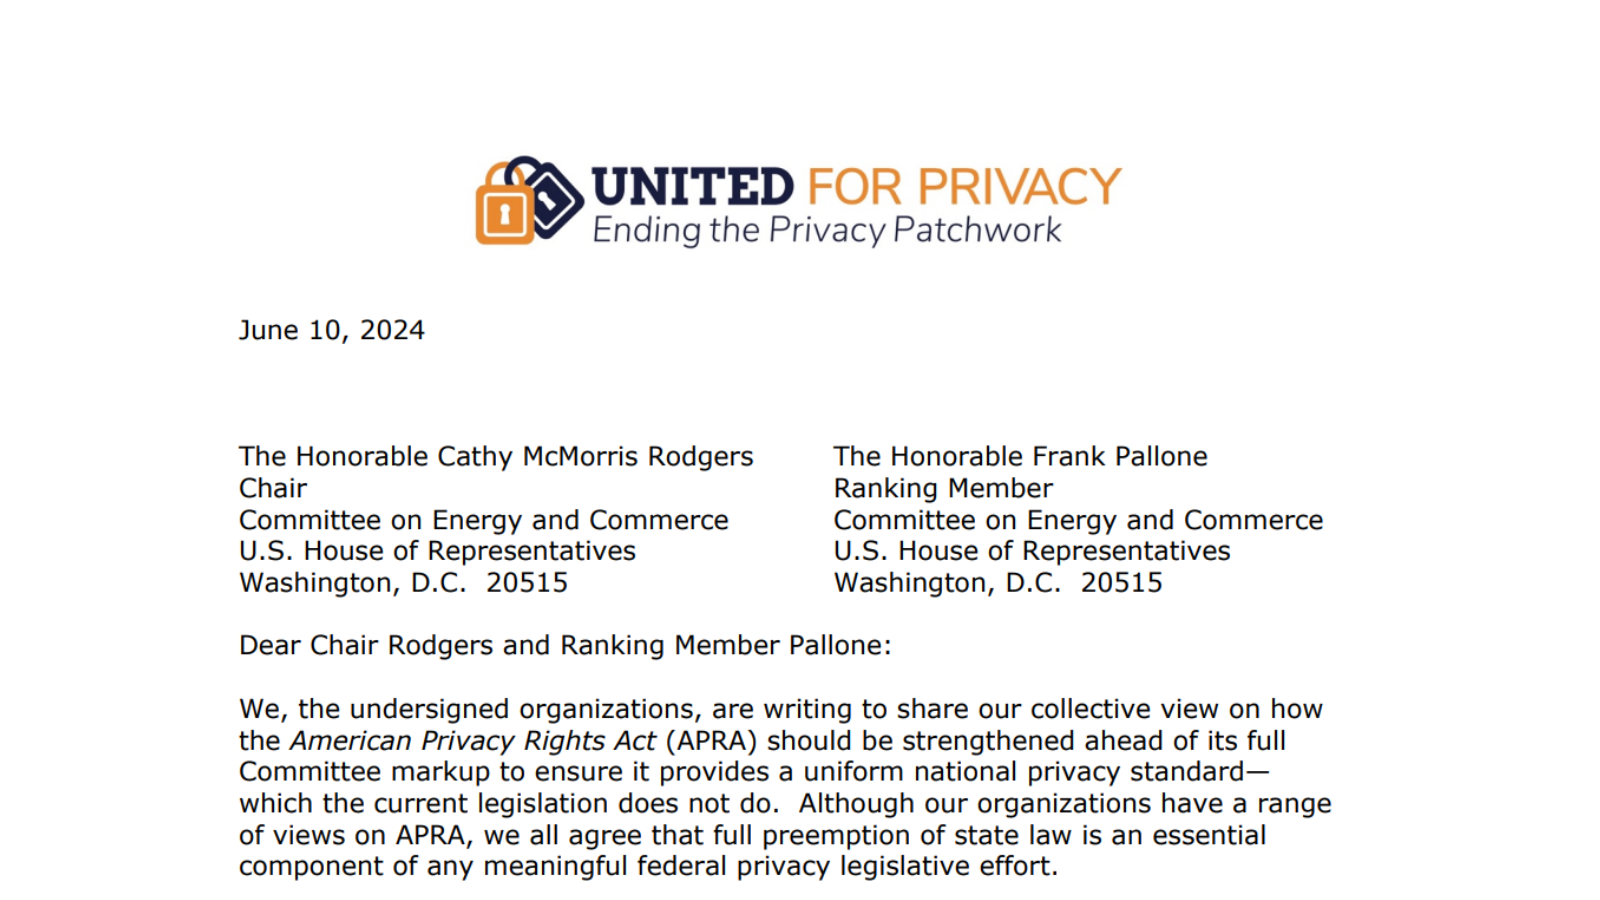 XR ASSOCIATION JOINS ASSOCIATIONS IN SIGNING UNITED FOR PRIVACY COALITION LETTER TO CONGRESS